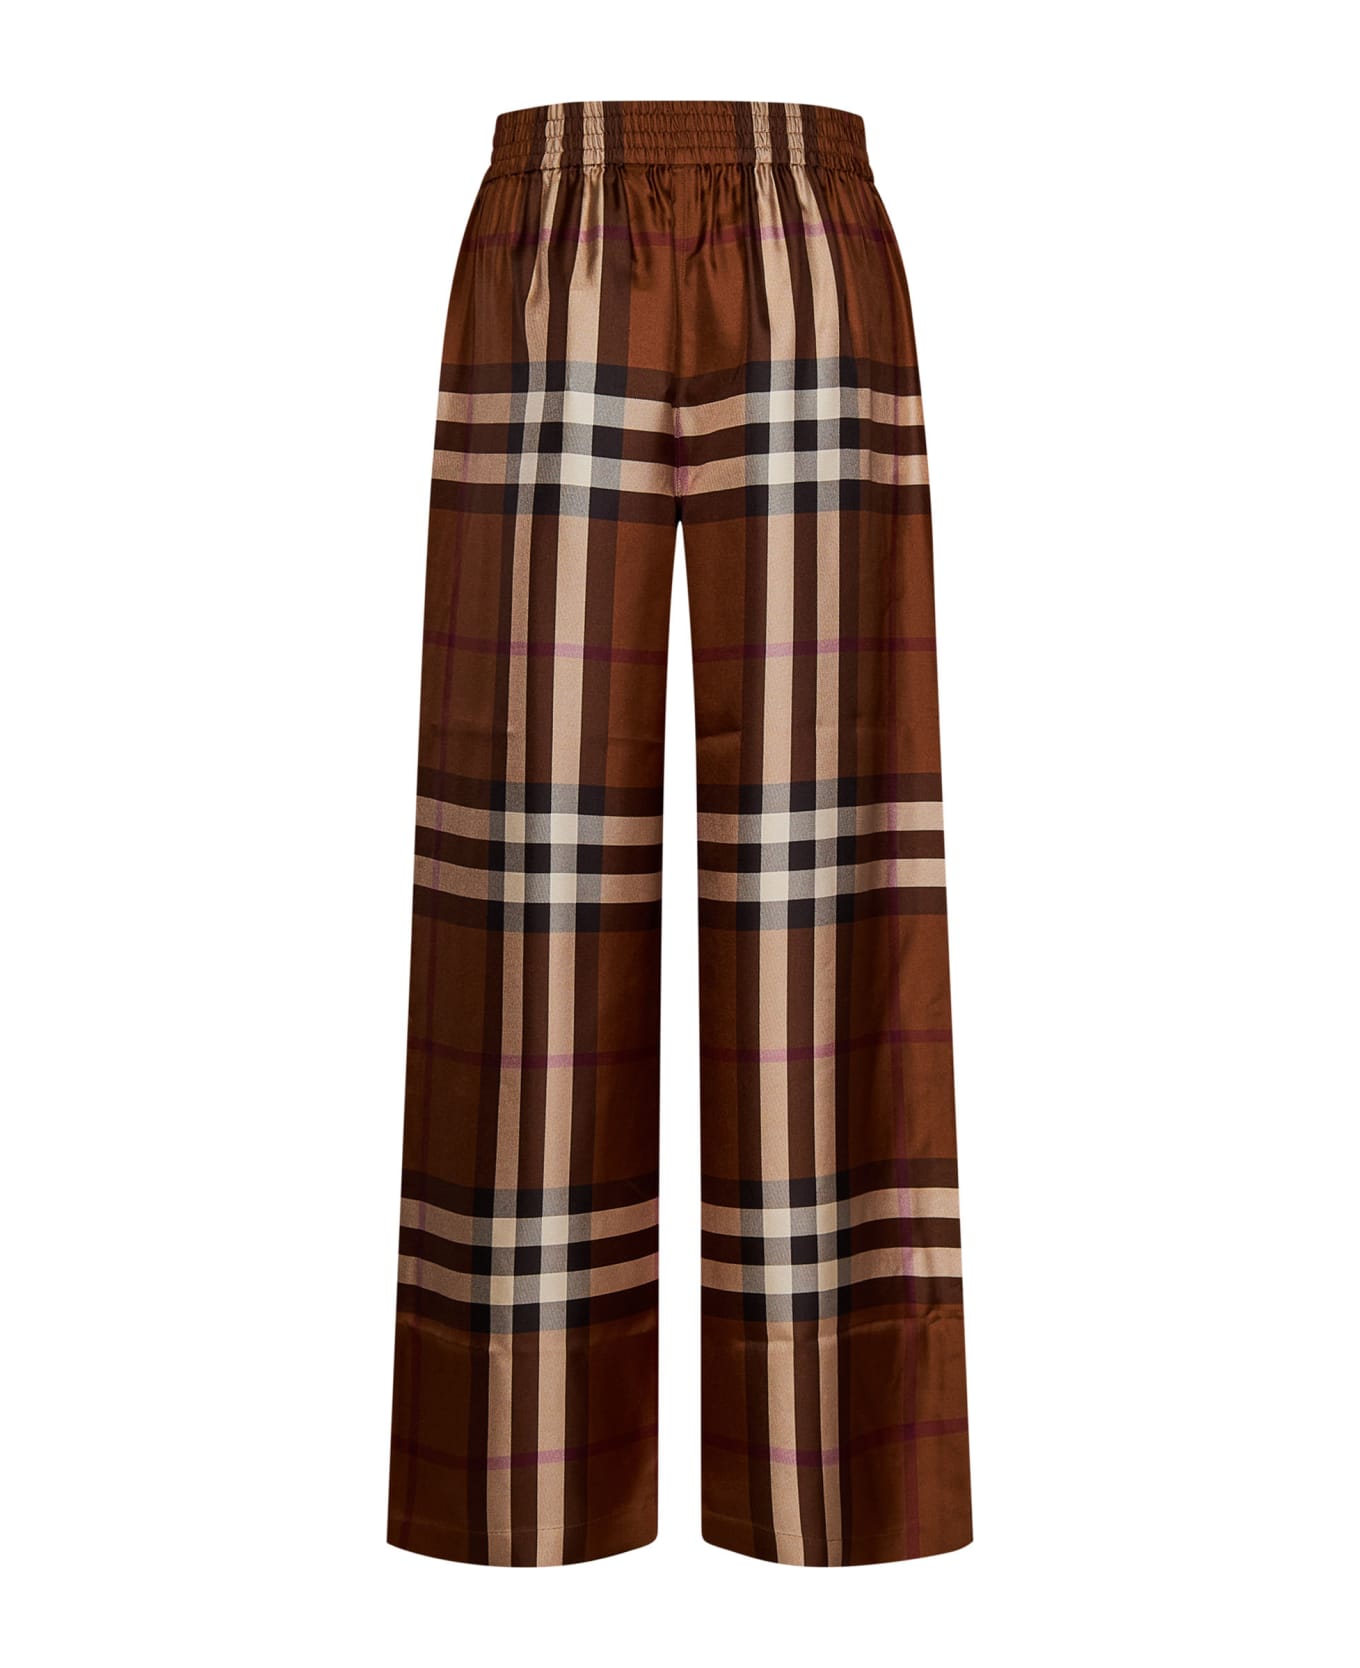 Burberry Trousers - Brown